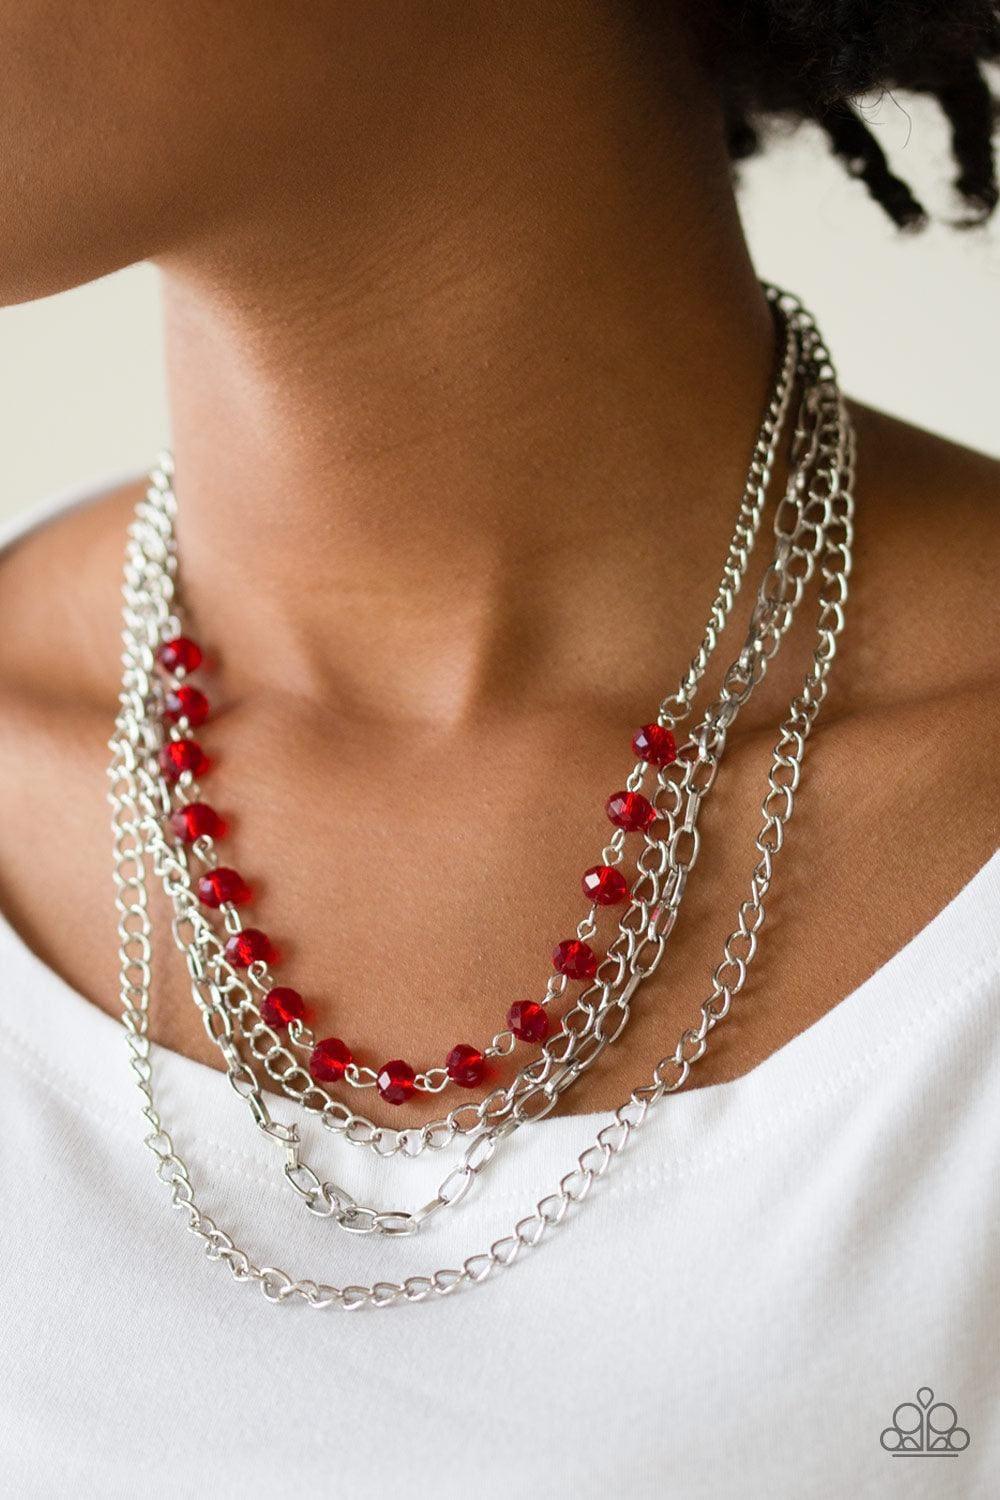 Paparazzi Accessories - Extravagant Elegance - Red Necklace - Bling by JessieK